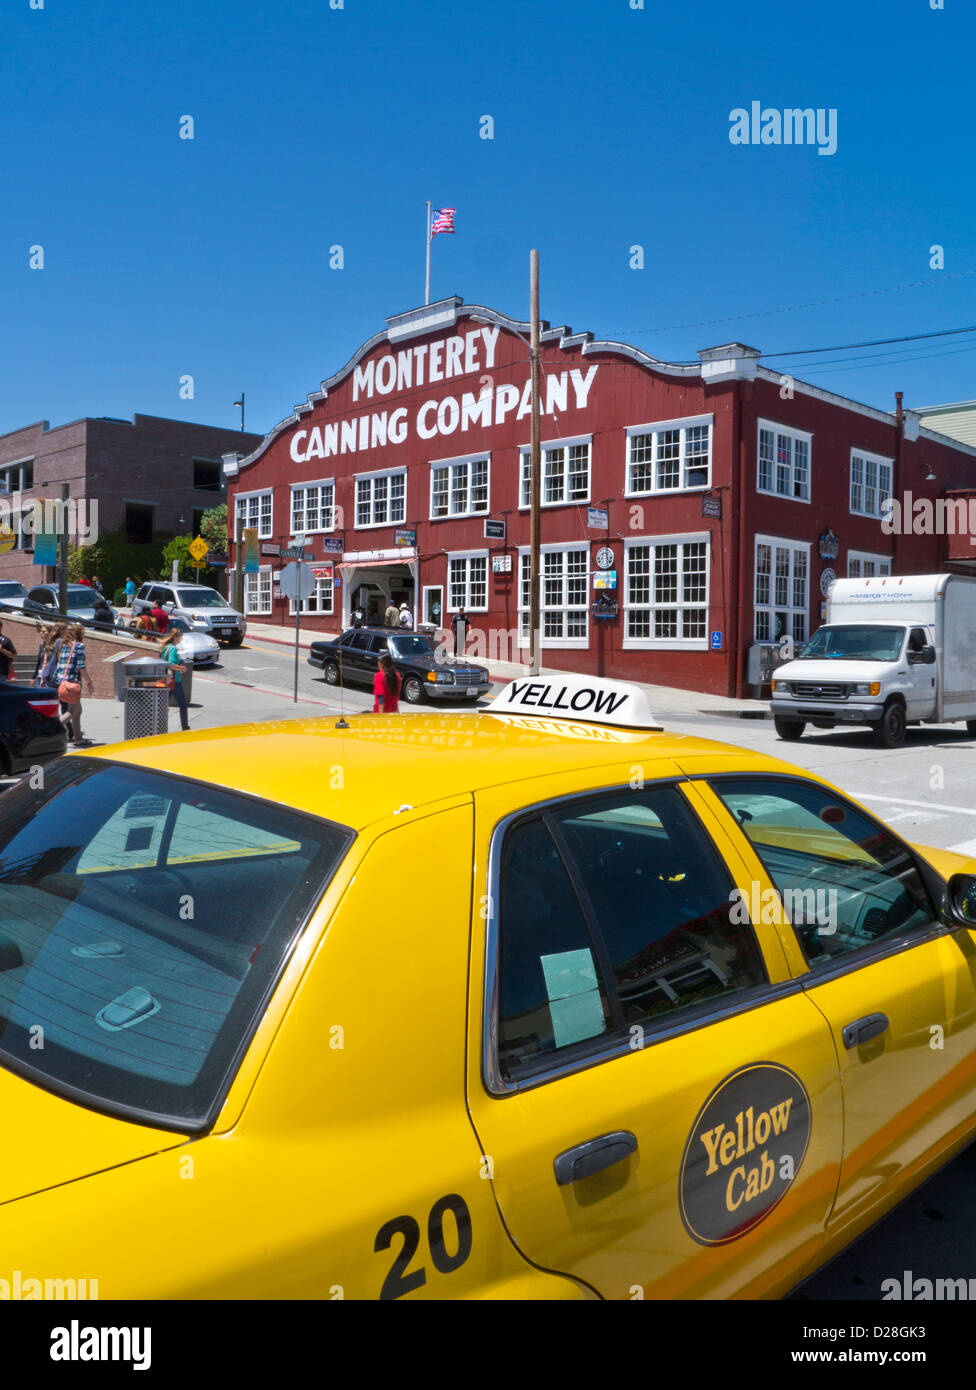 CANNERY ROW AMERICANA YELLOW CAB Monterey Canning Company building flying flag Cannery Row with yellow taxi cab in foreground Monterey California USA Stock Photo